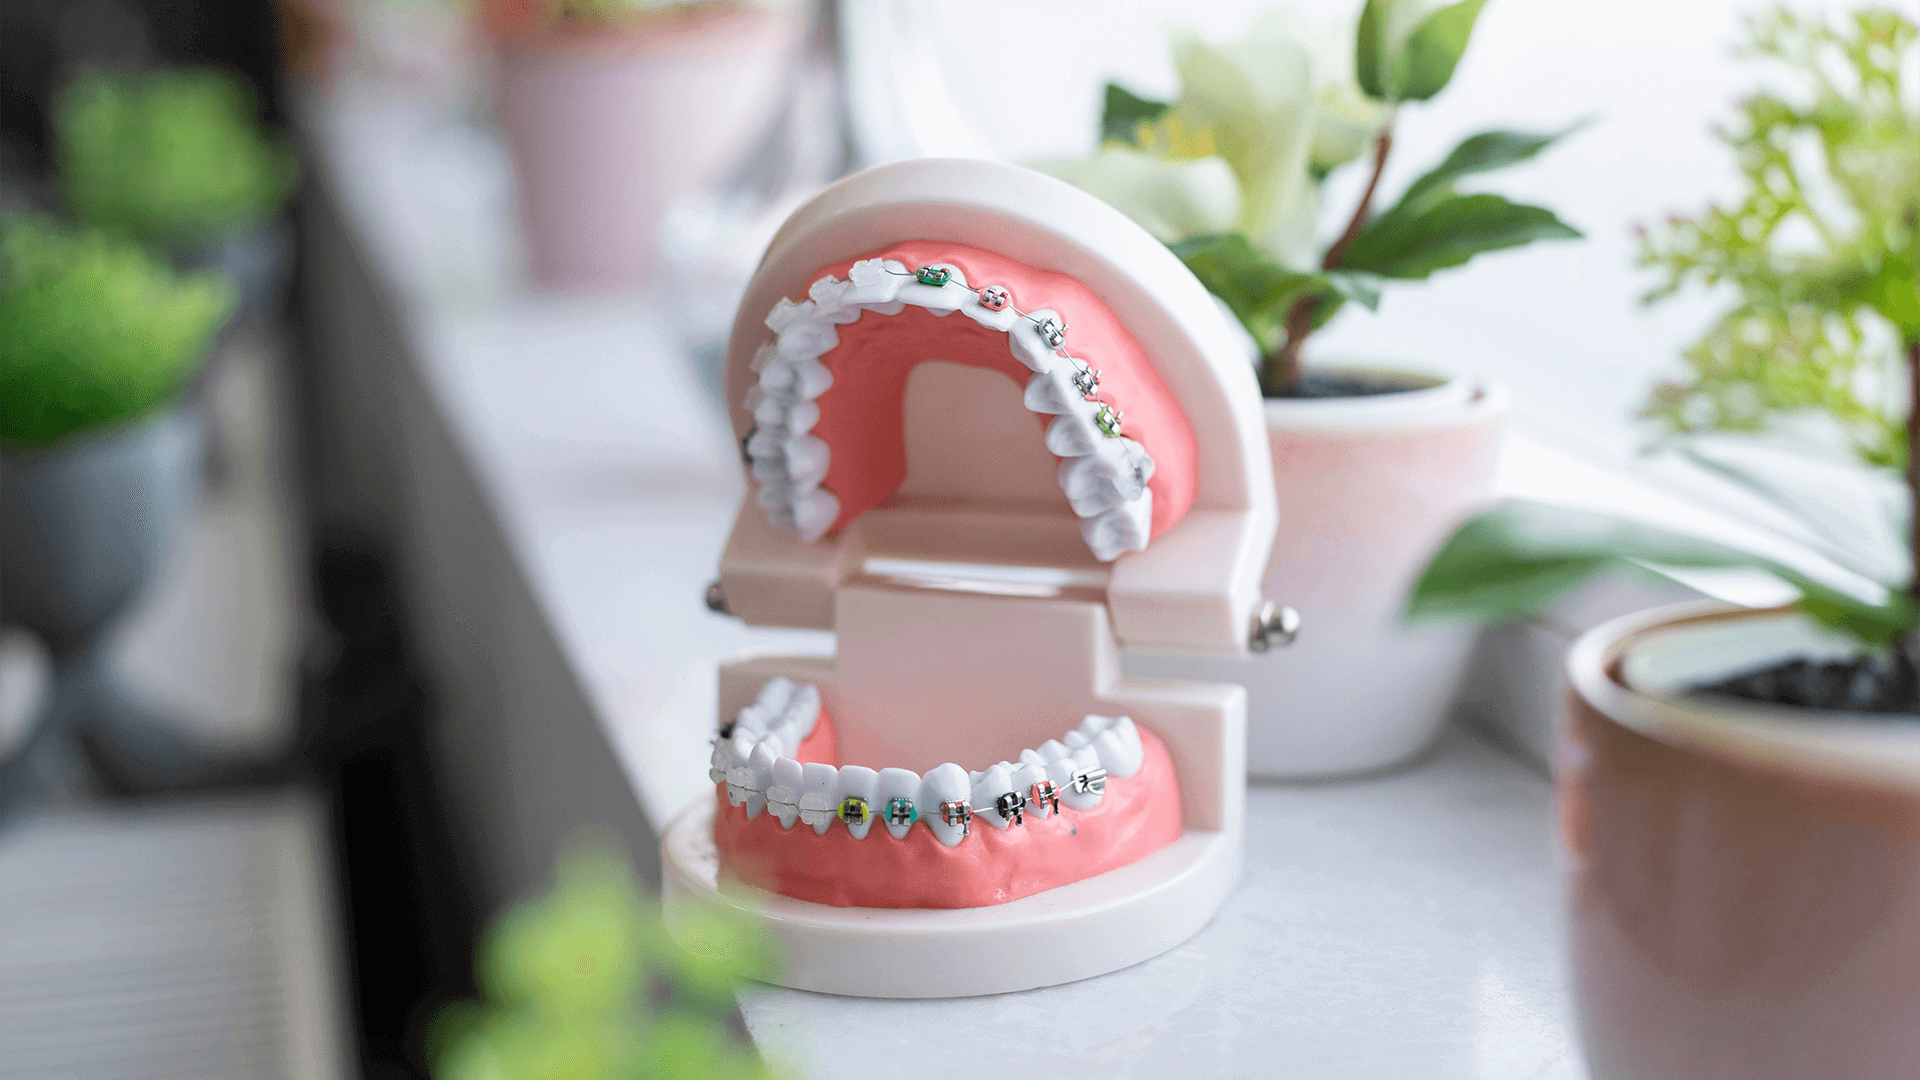 Model of human mouth with braces on teeth